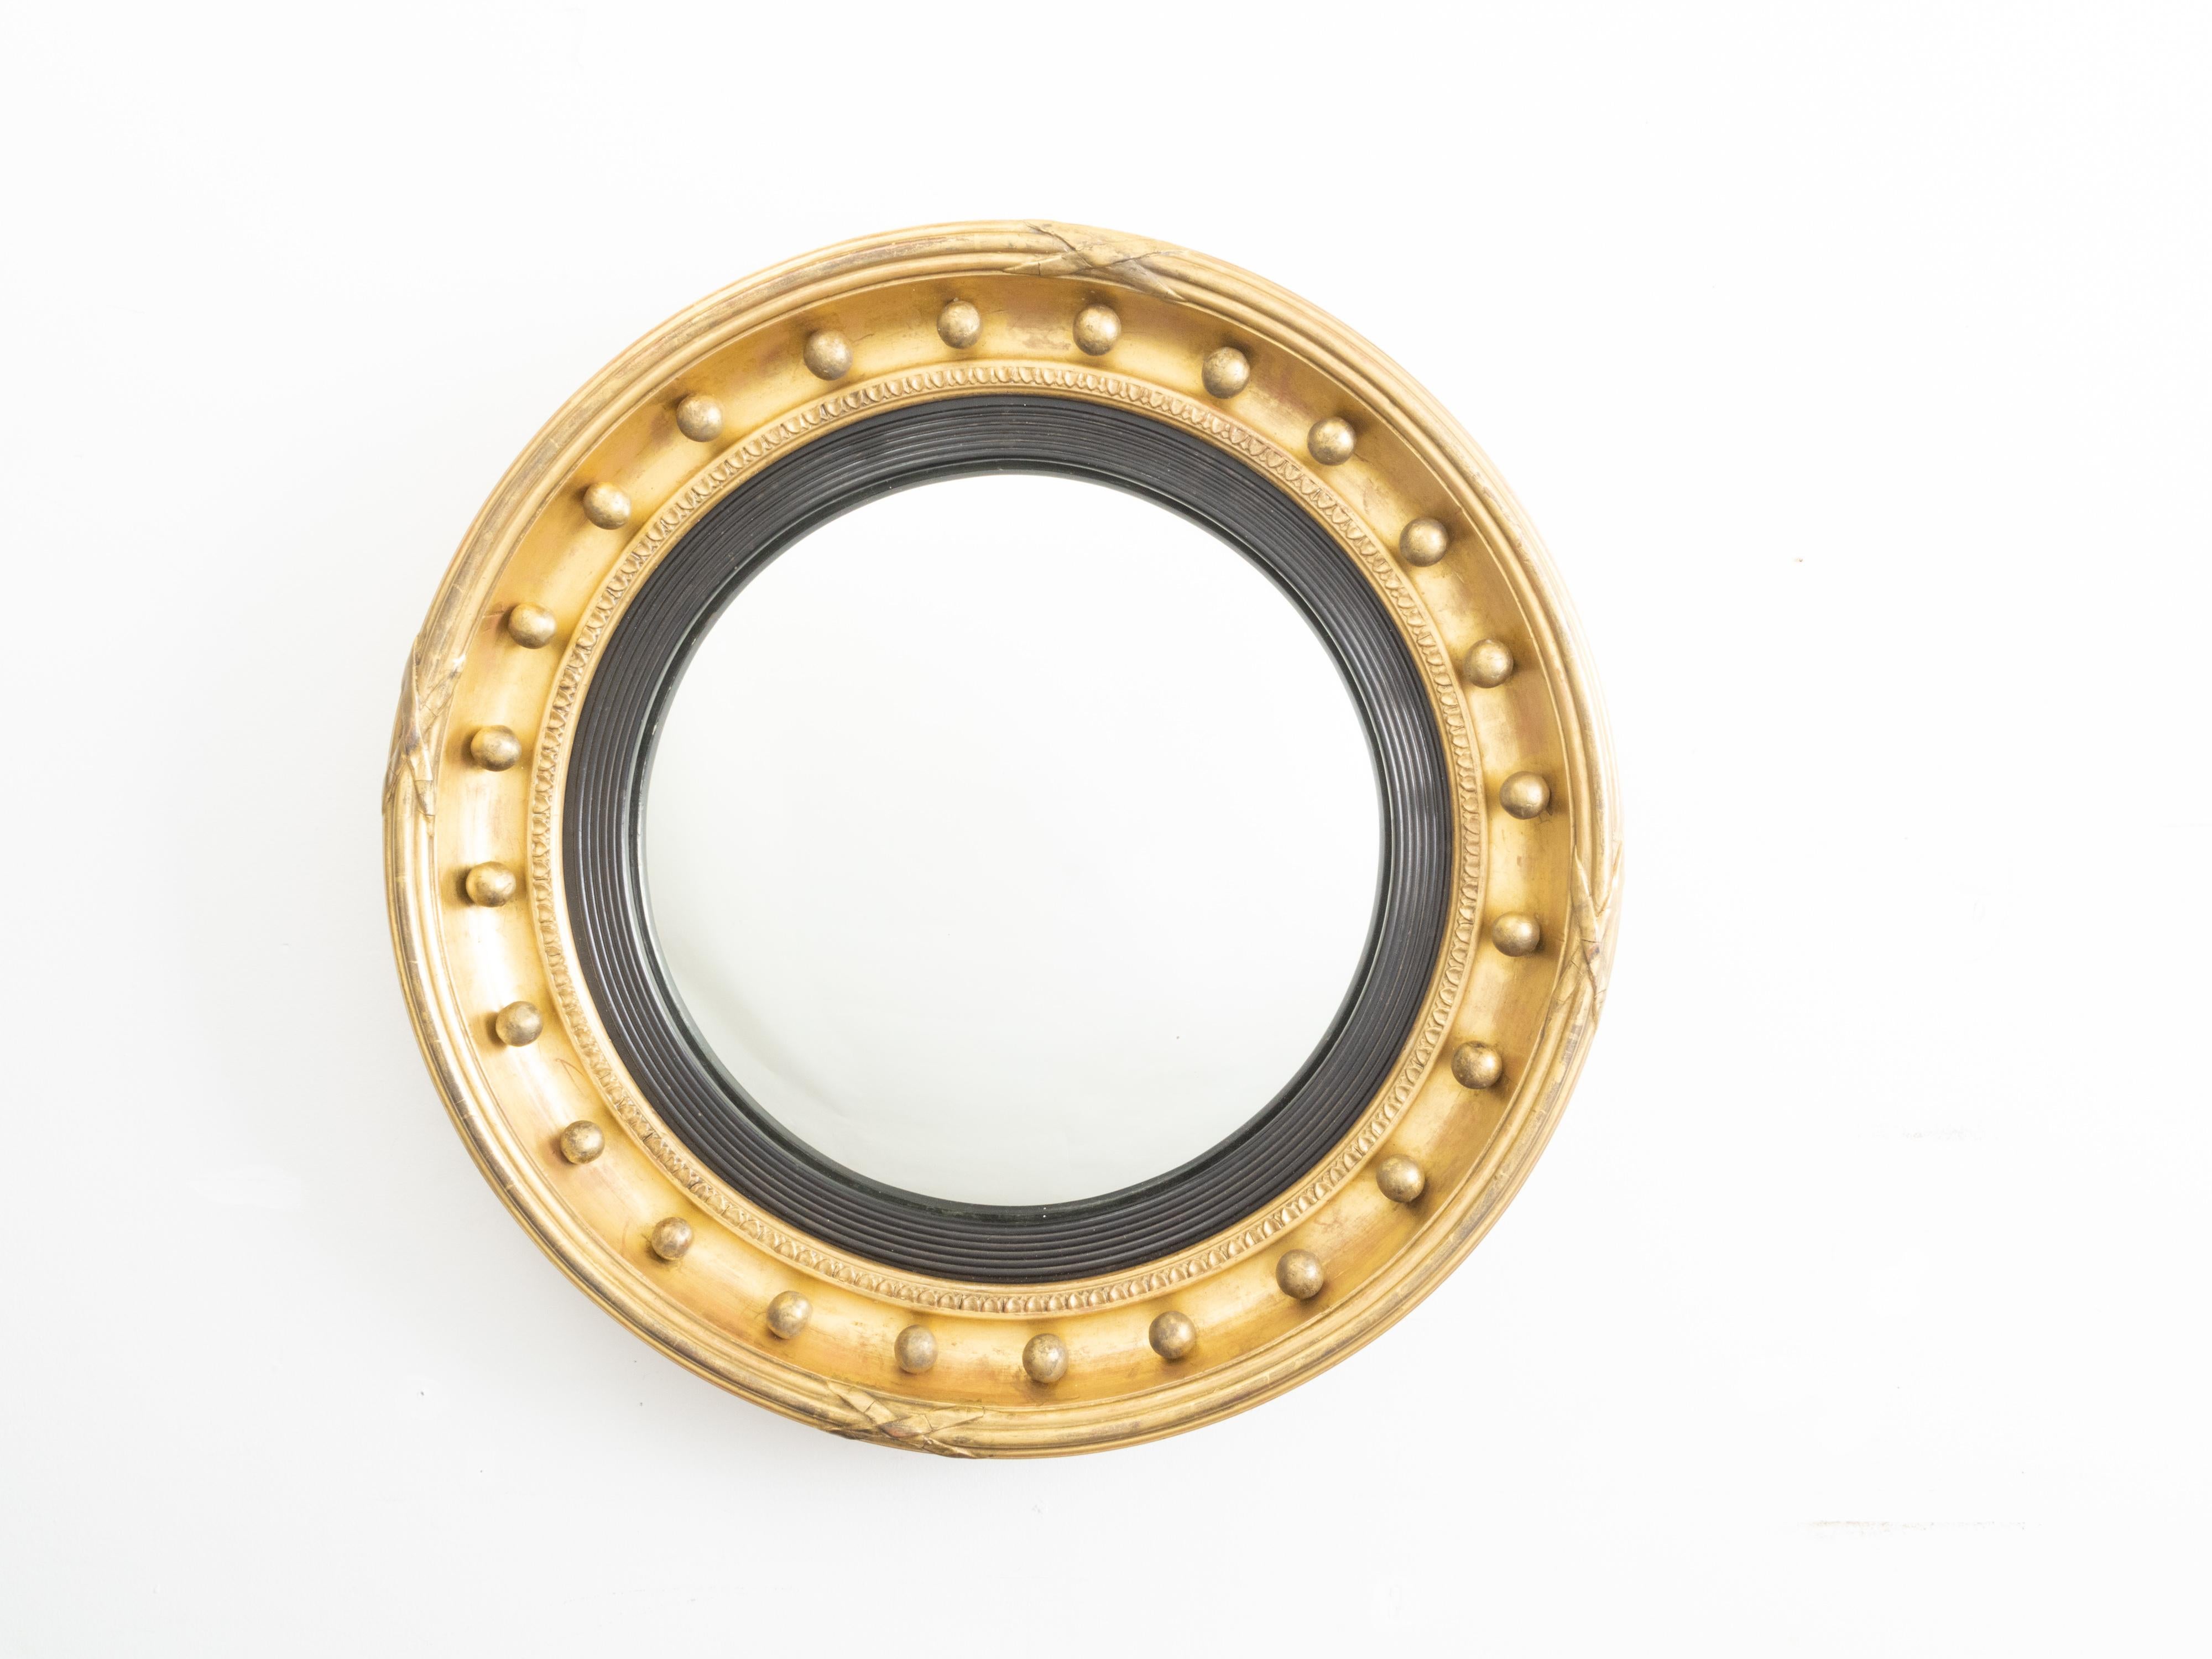 An English giltwood bullseye convex girandole mirror from the 19th century with ebonized reeded accents. Created in England during the 19th century, this circular mirror features a convex mirror plate, surrounded by a reeded molding of ebonized